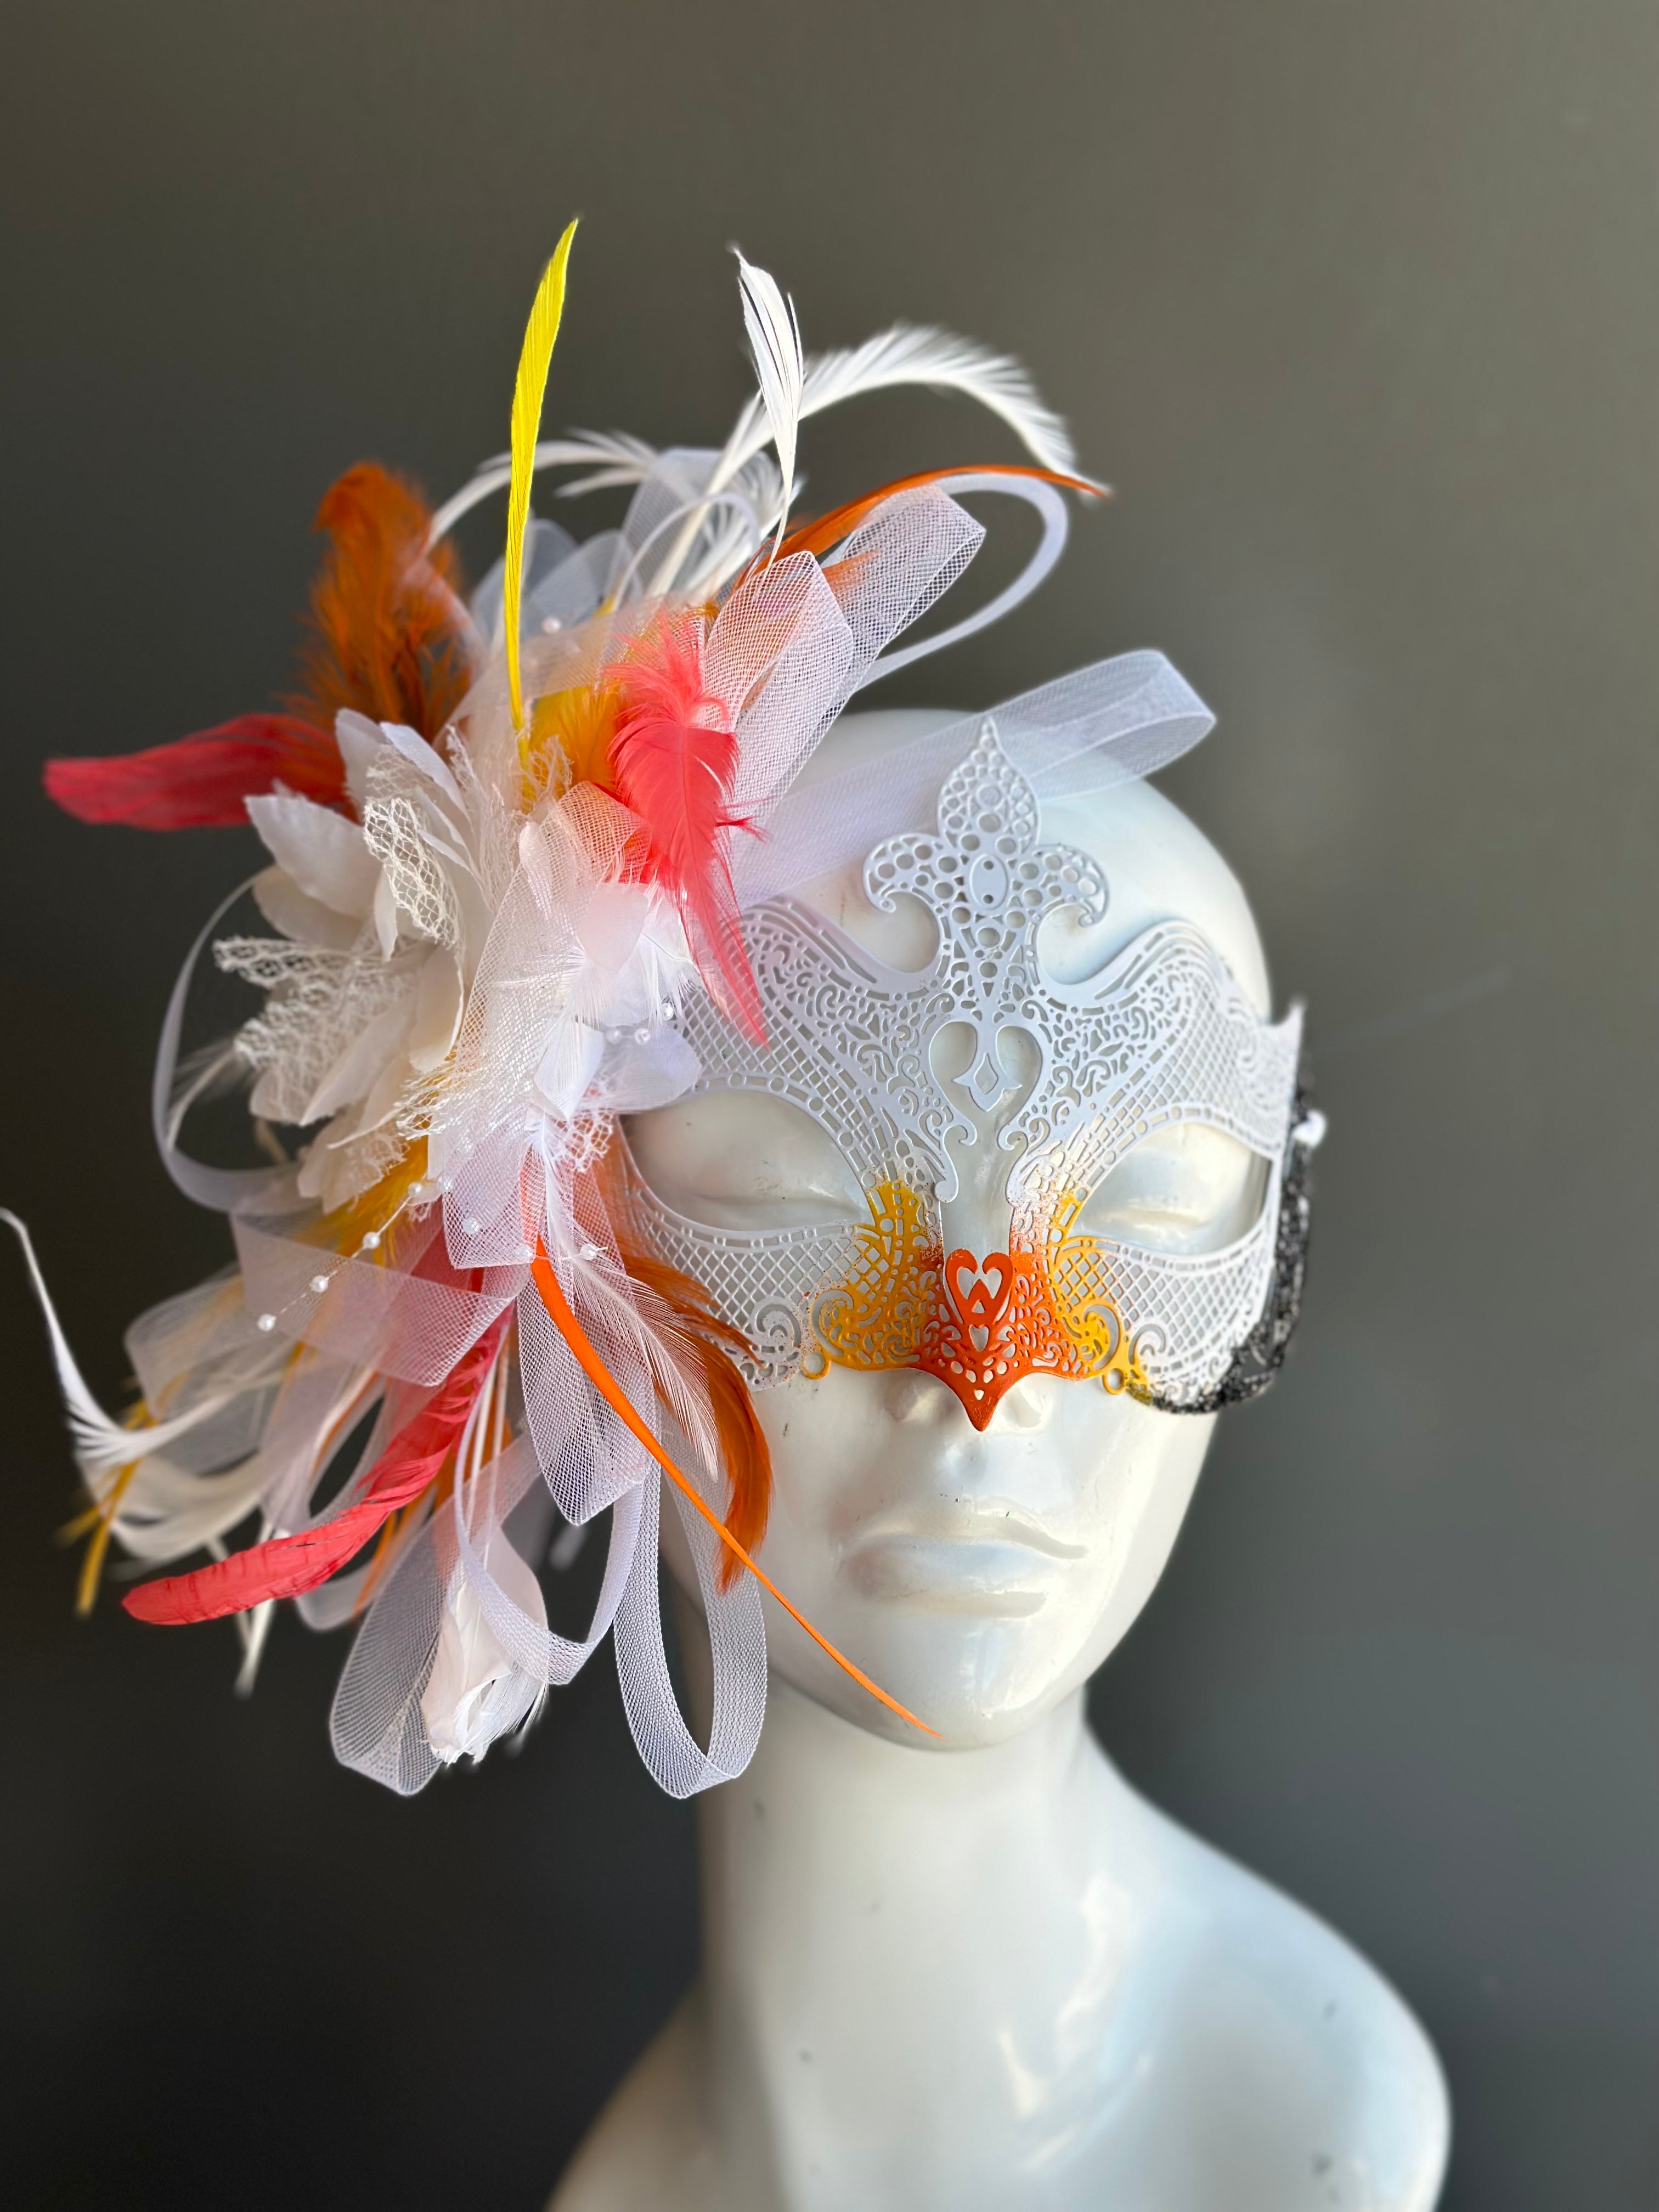 White metal masquerade mask with orange and yellow accents and orange and yellow feathers.